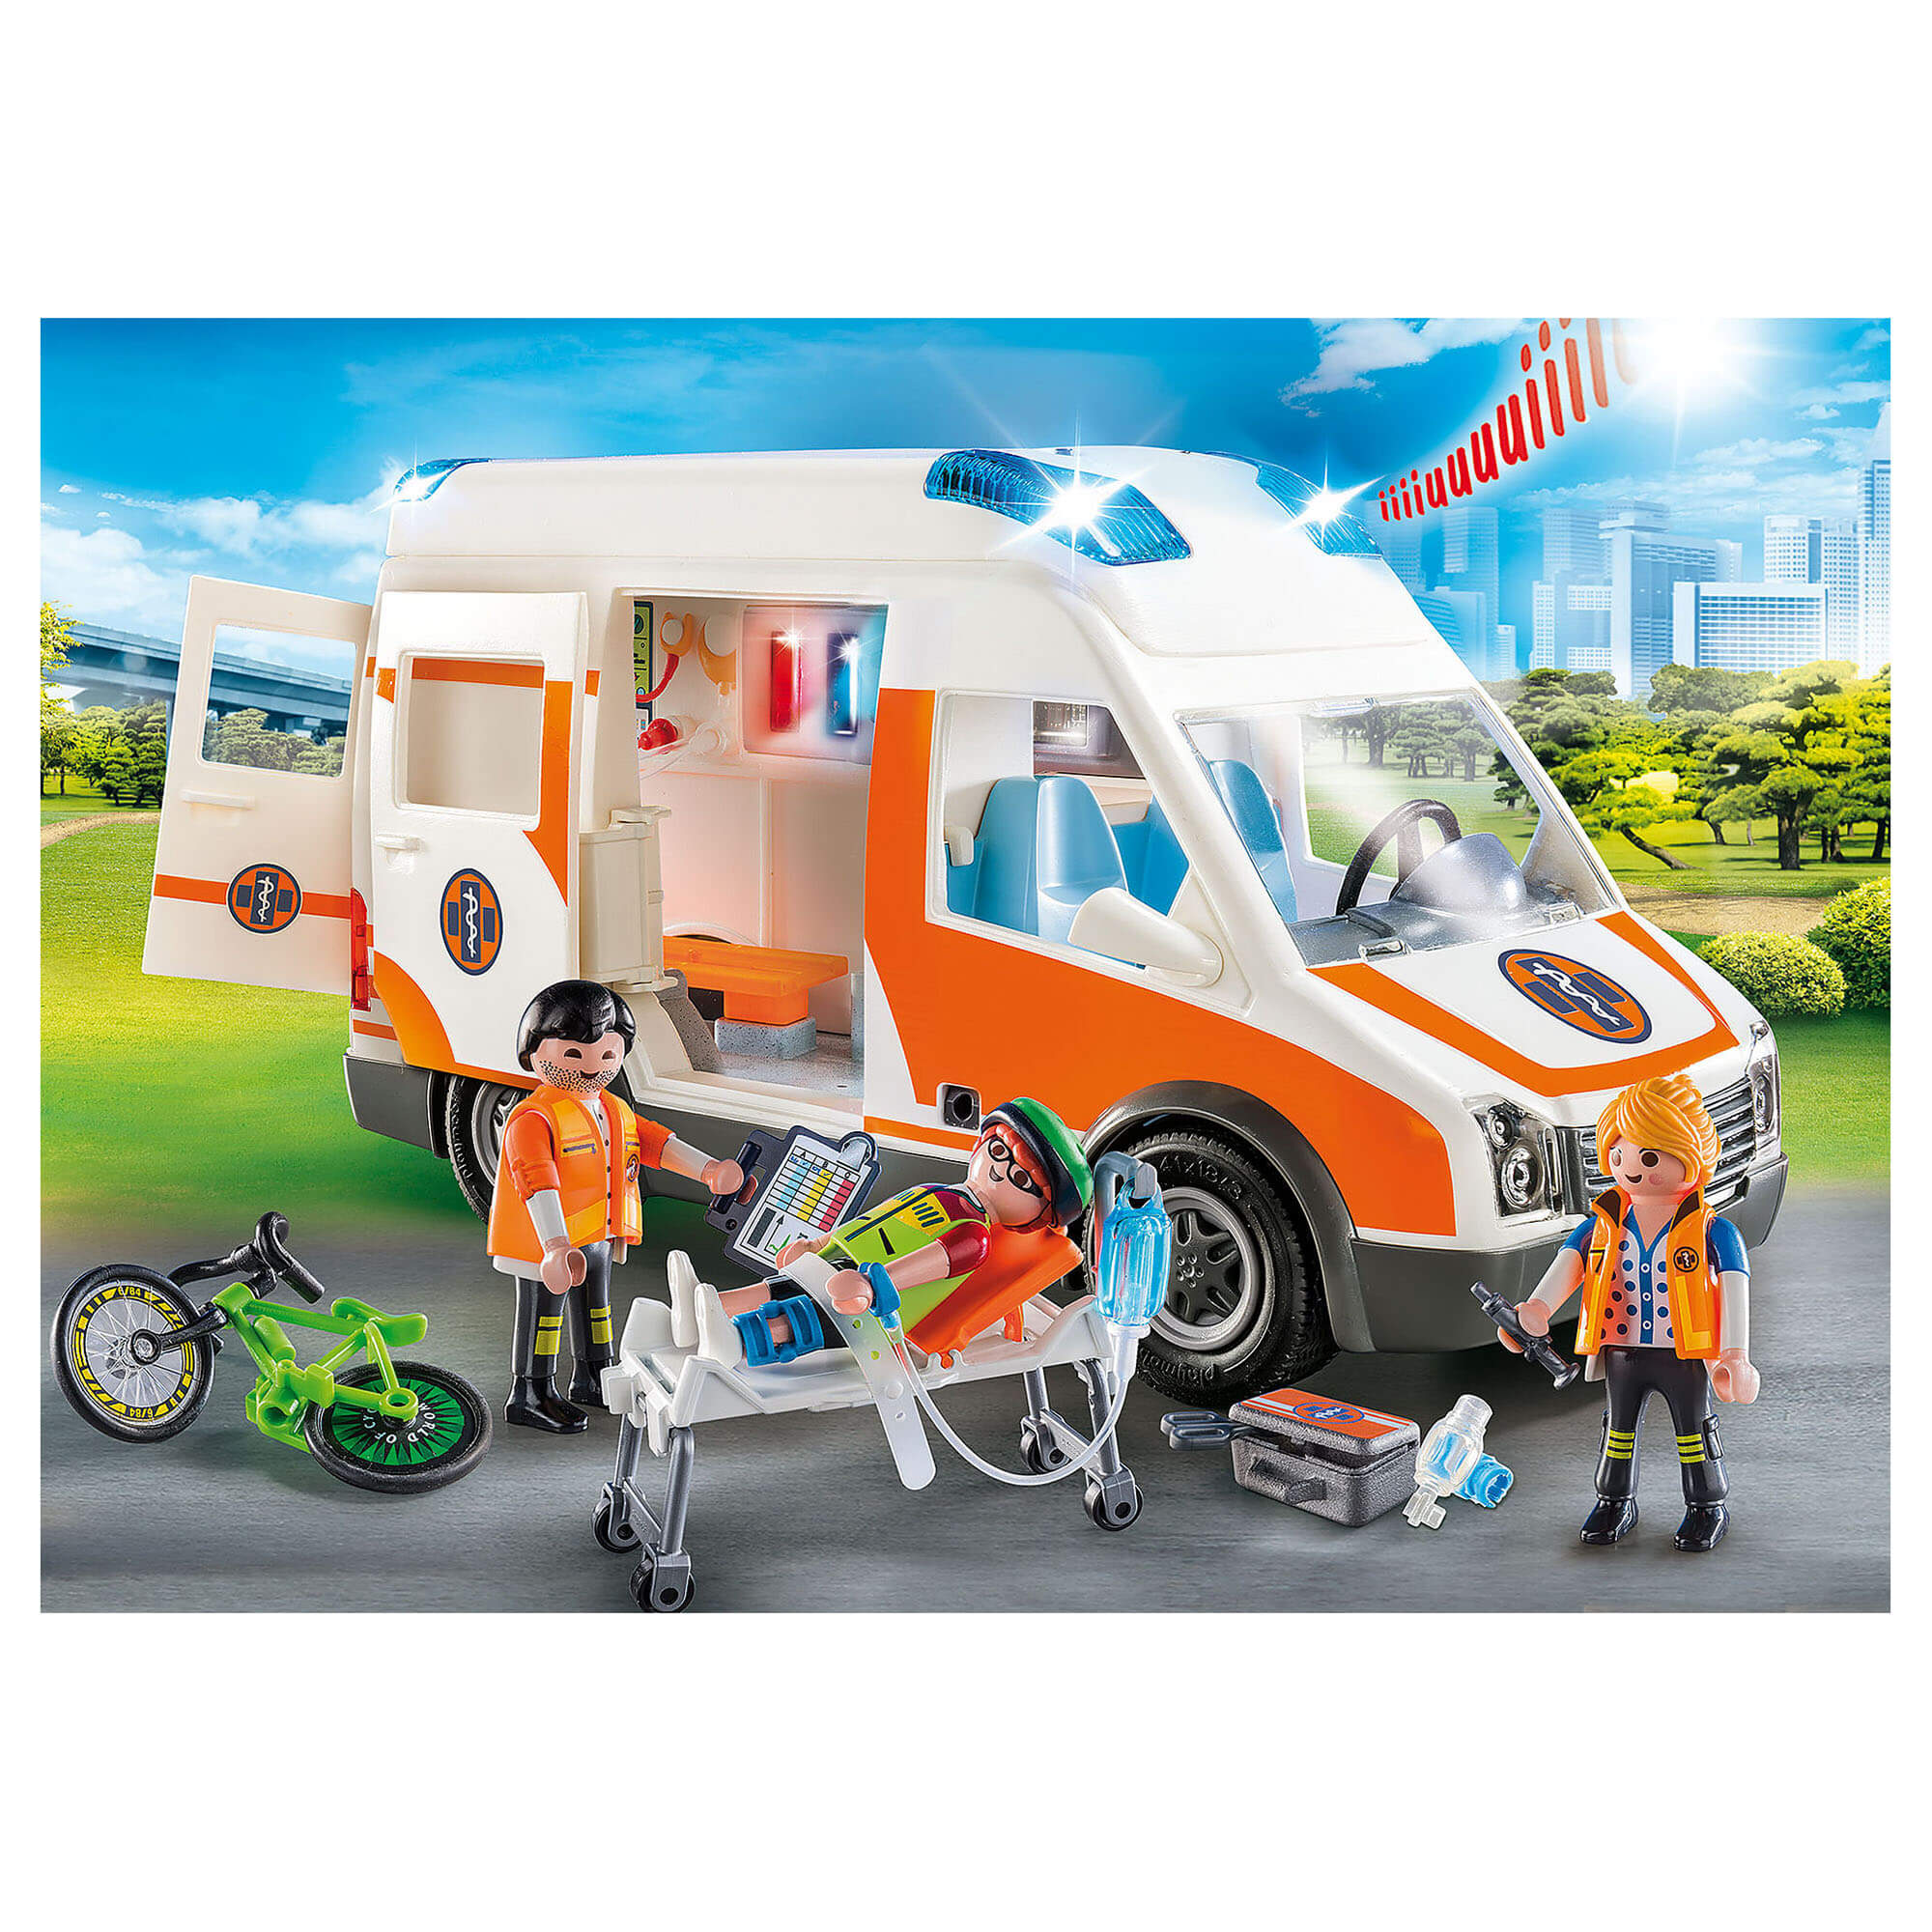 PLAYMOBIL Rescue 911 Ambulance with Flashing Lights (70049)